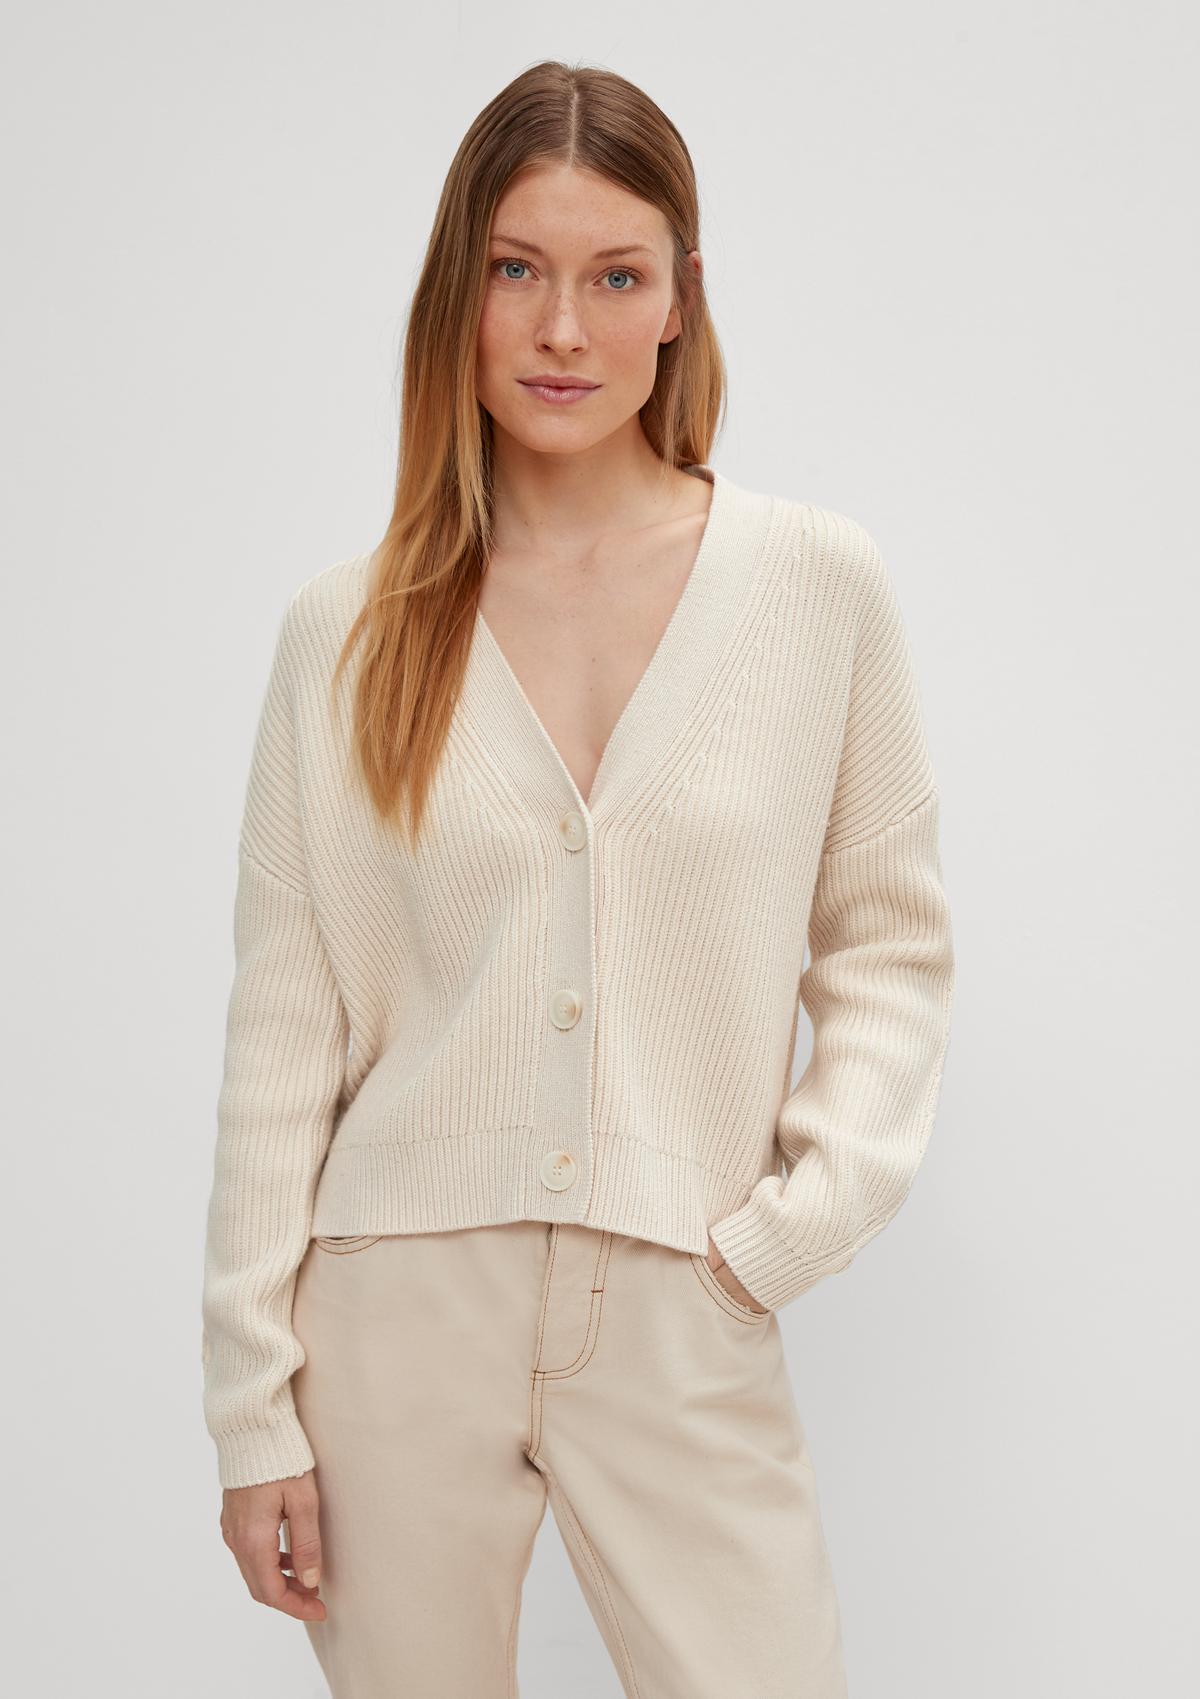 Cardigan with a cable knit Comma pattern | light beige 